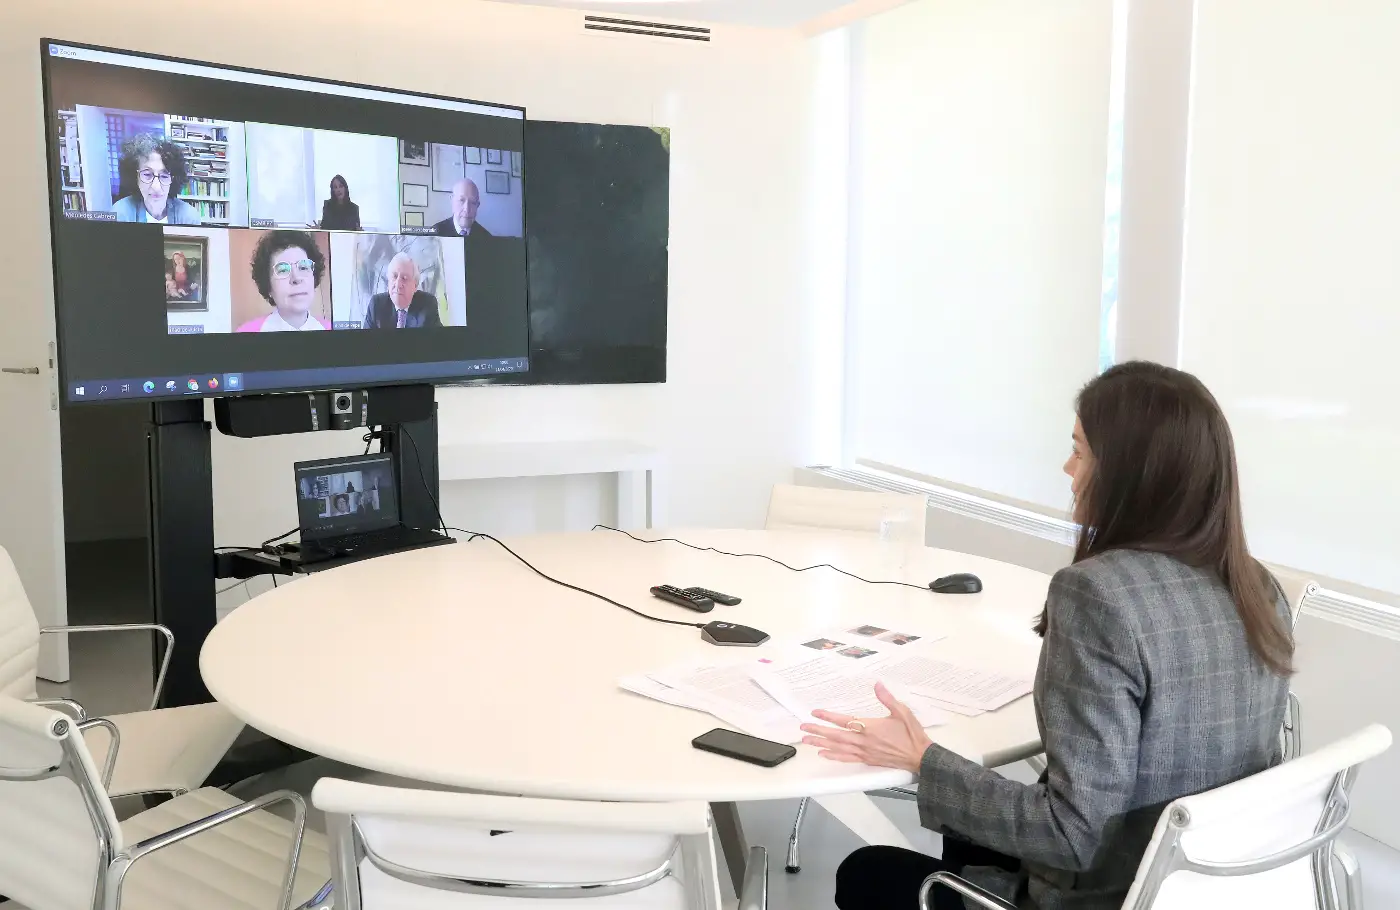 Queen Letizia held a video conference today with the Directors and employers of the Student Residence